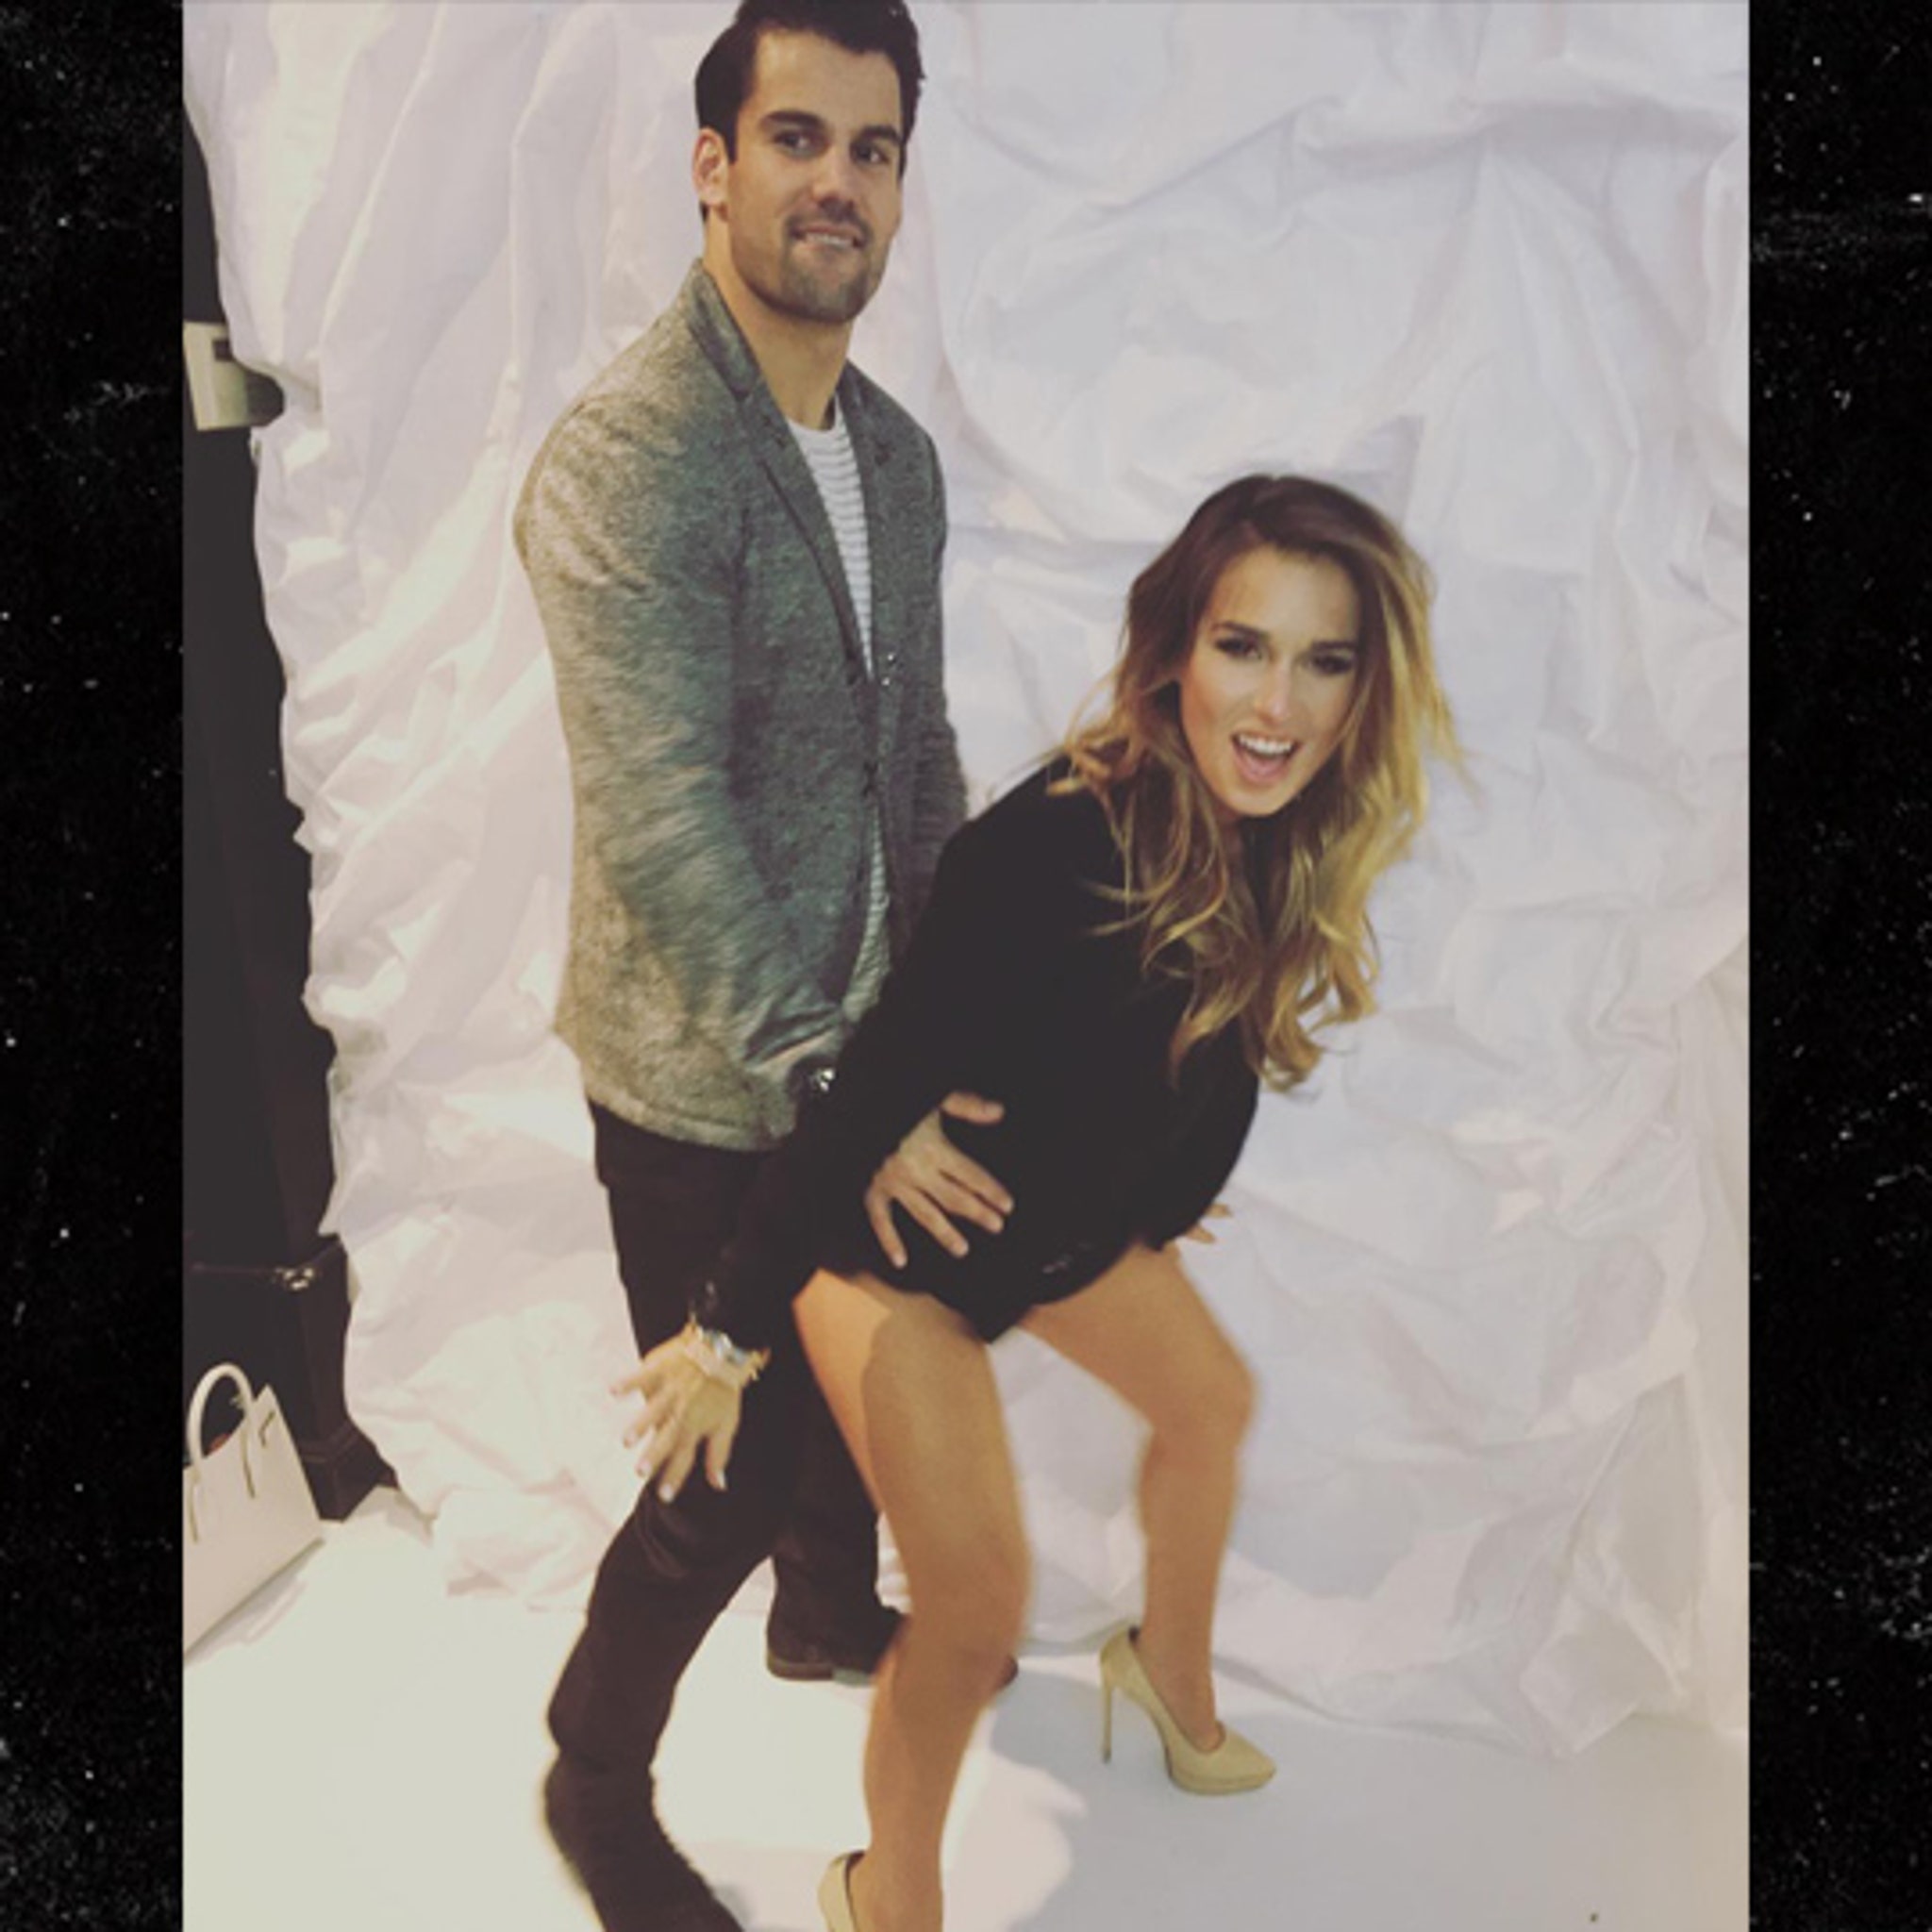 NY Jets Eric Decker Very Dirty Dancing .. photo